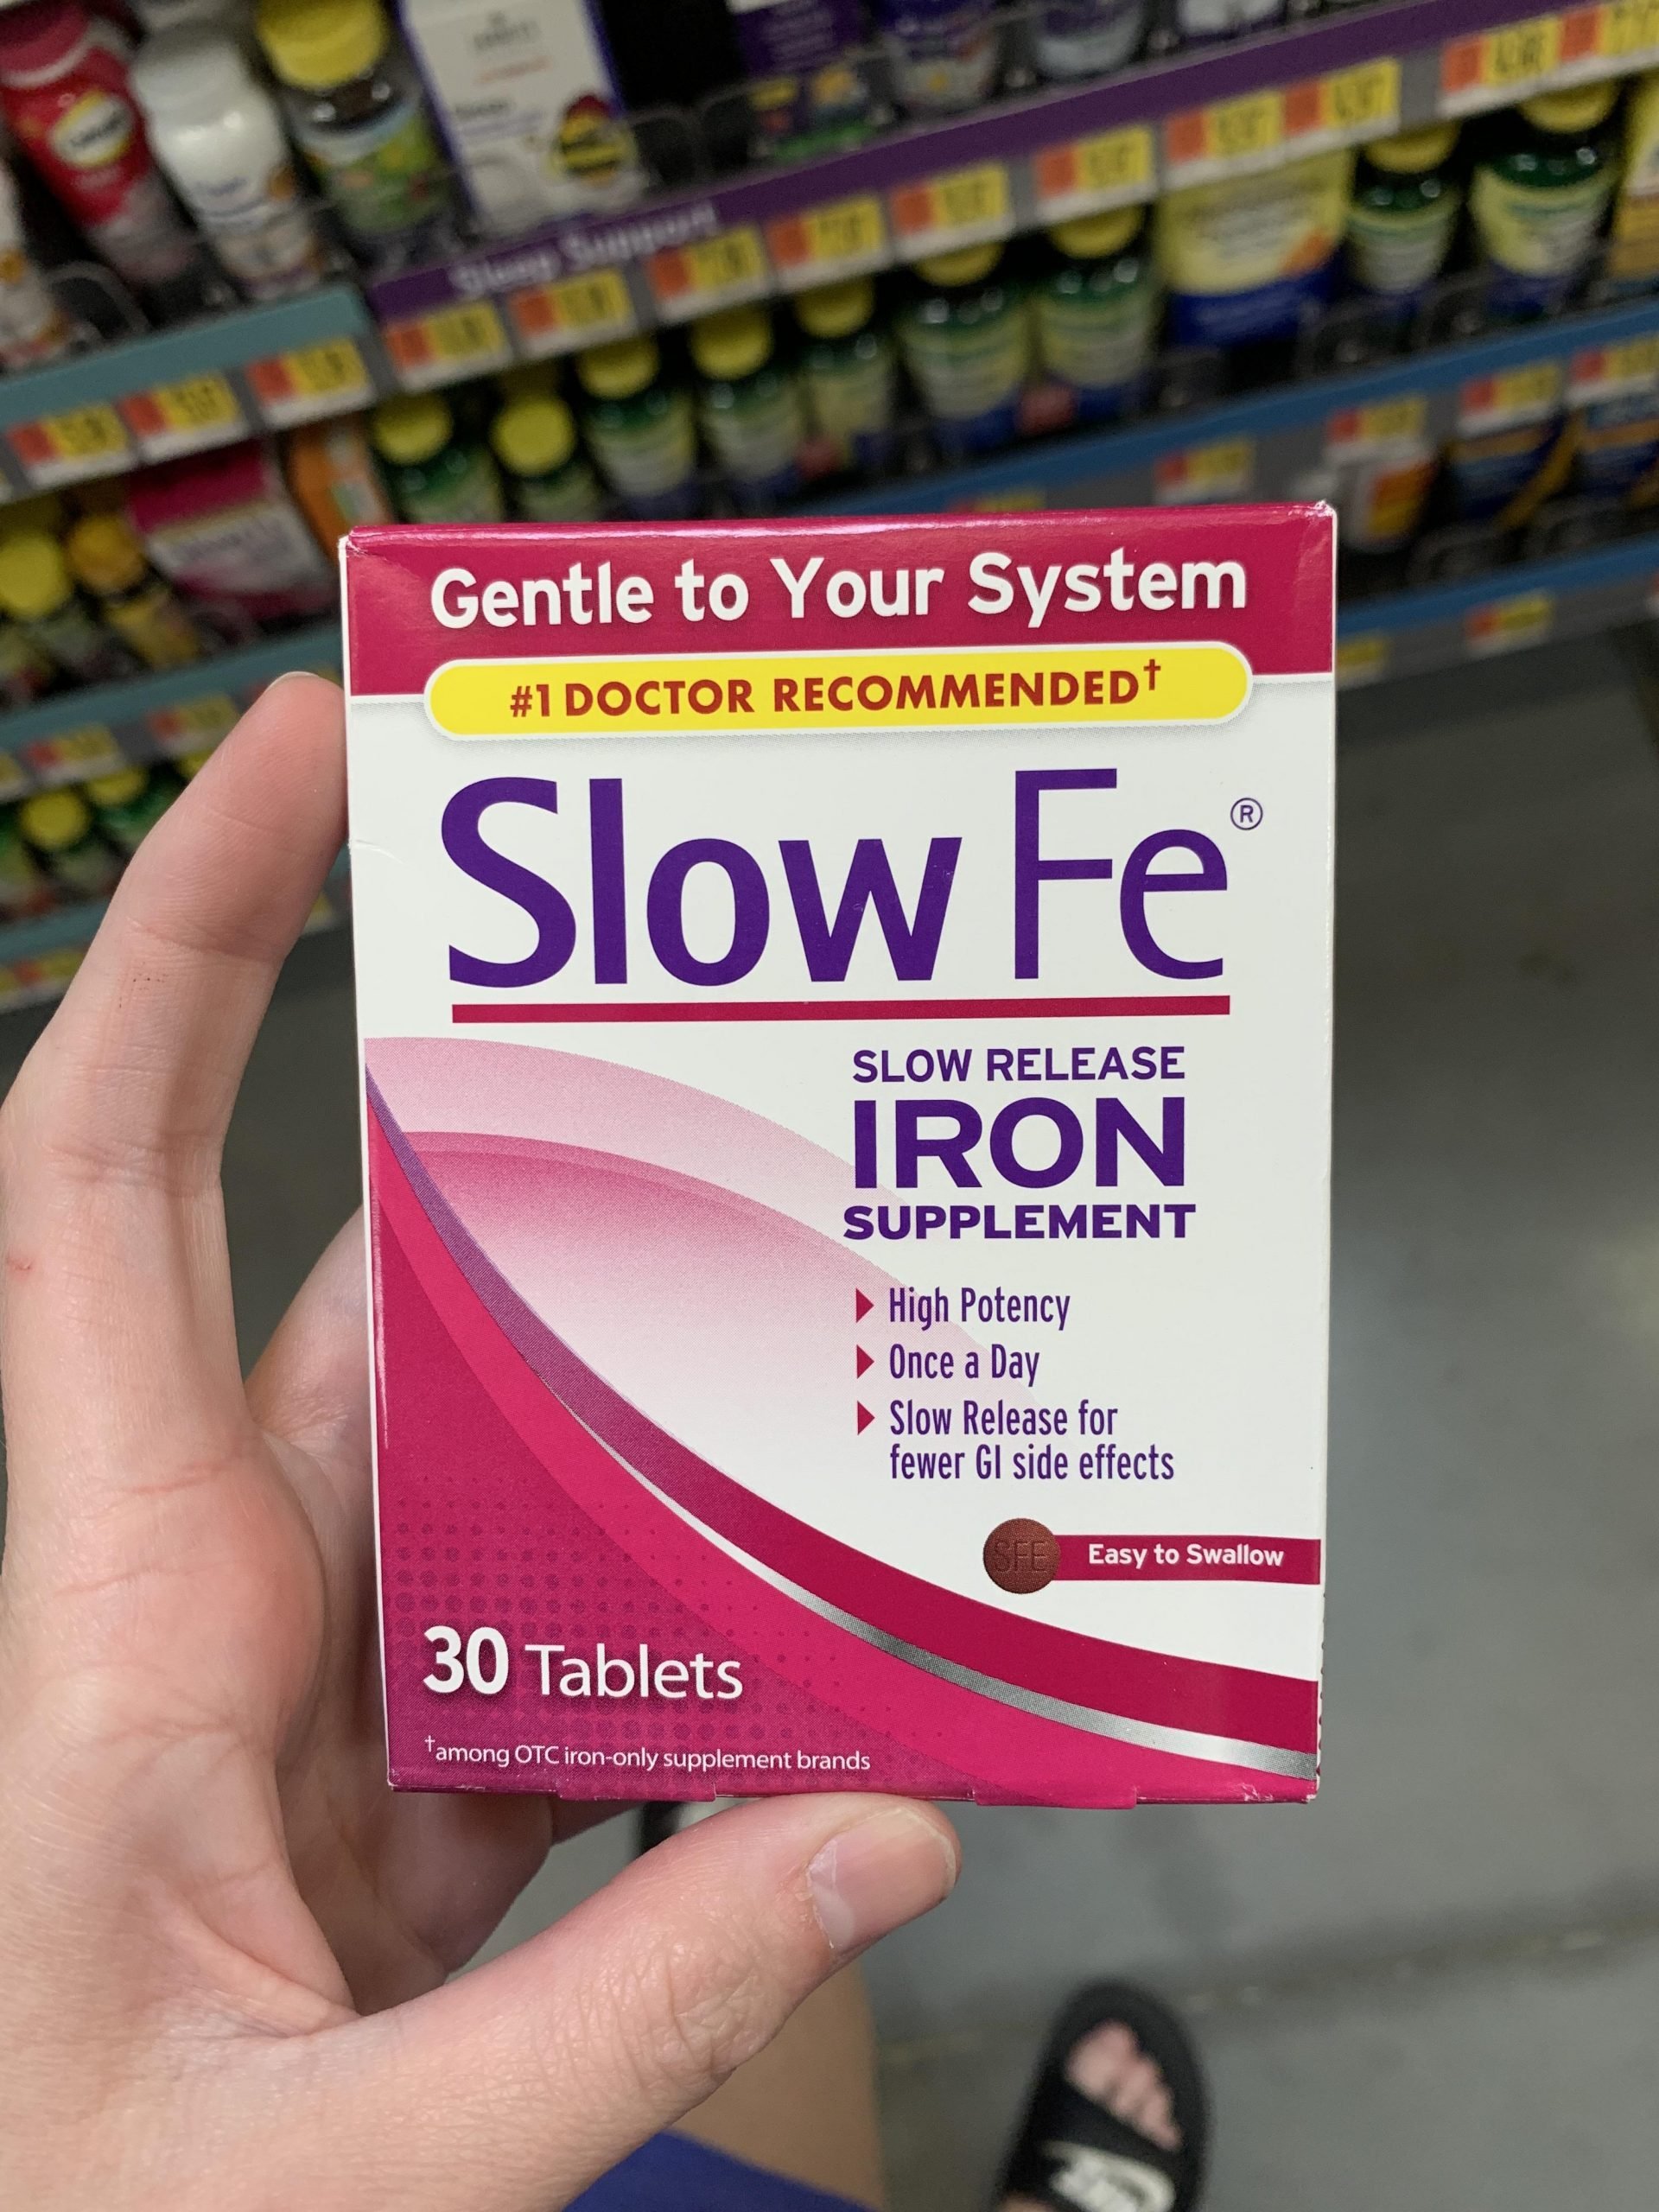 Can Iron Supplements Cause Constipation